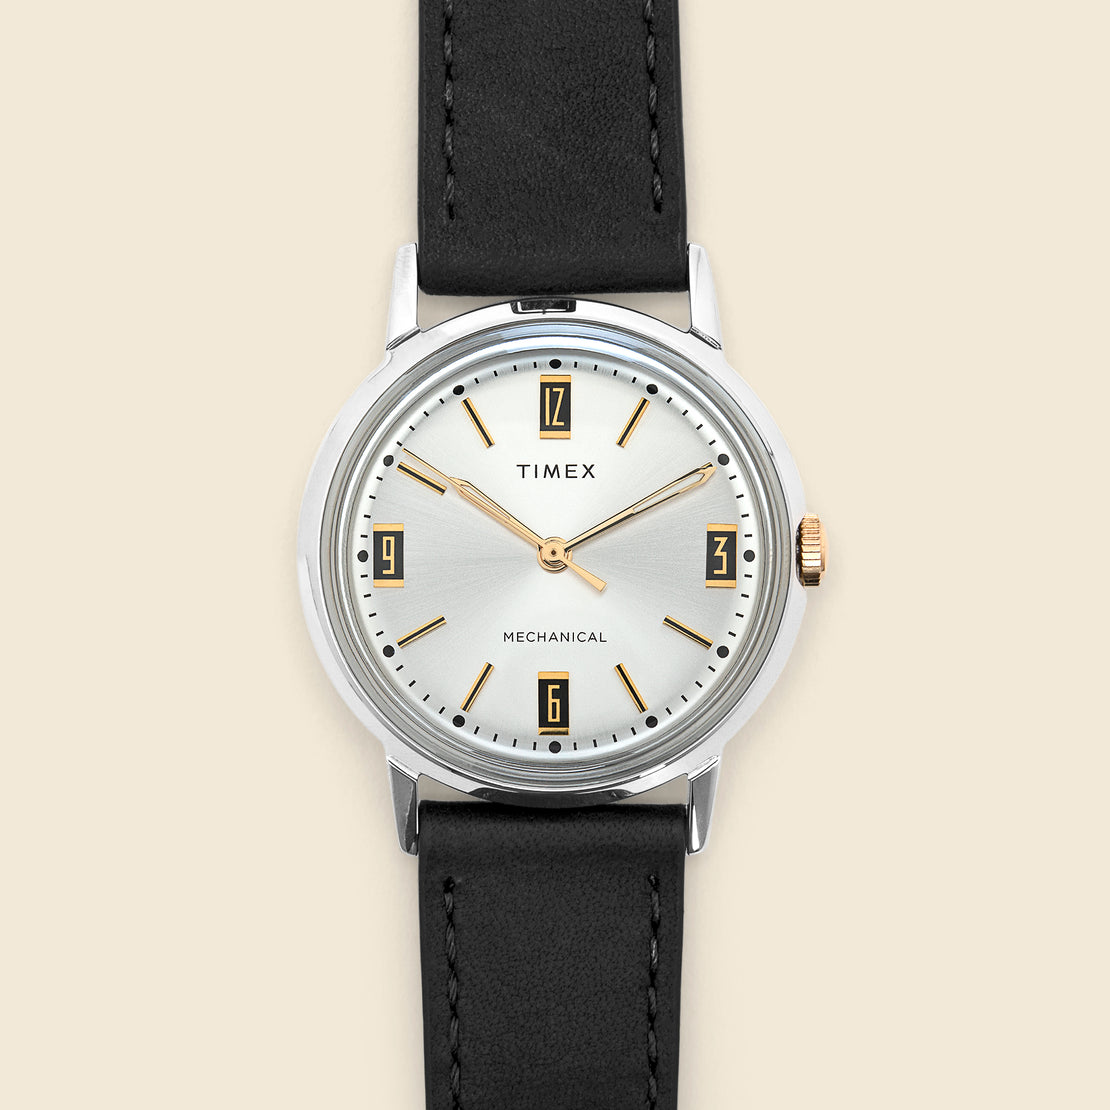 Timex Marlin Hand-Wound Leather Strap Watch 34mm - Stainless Steel/Black/Silver